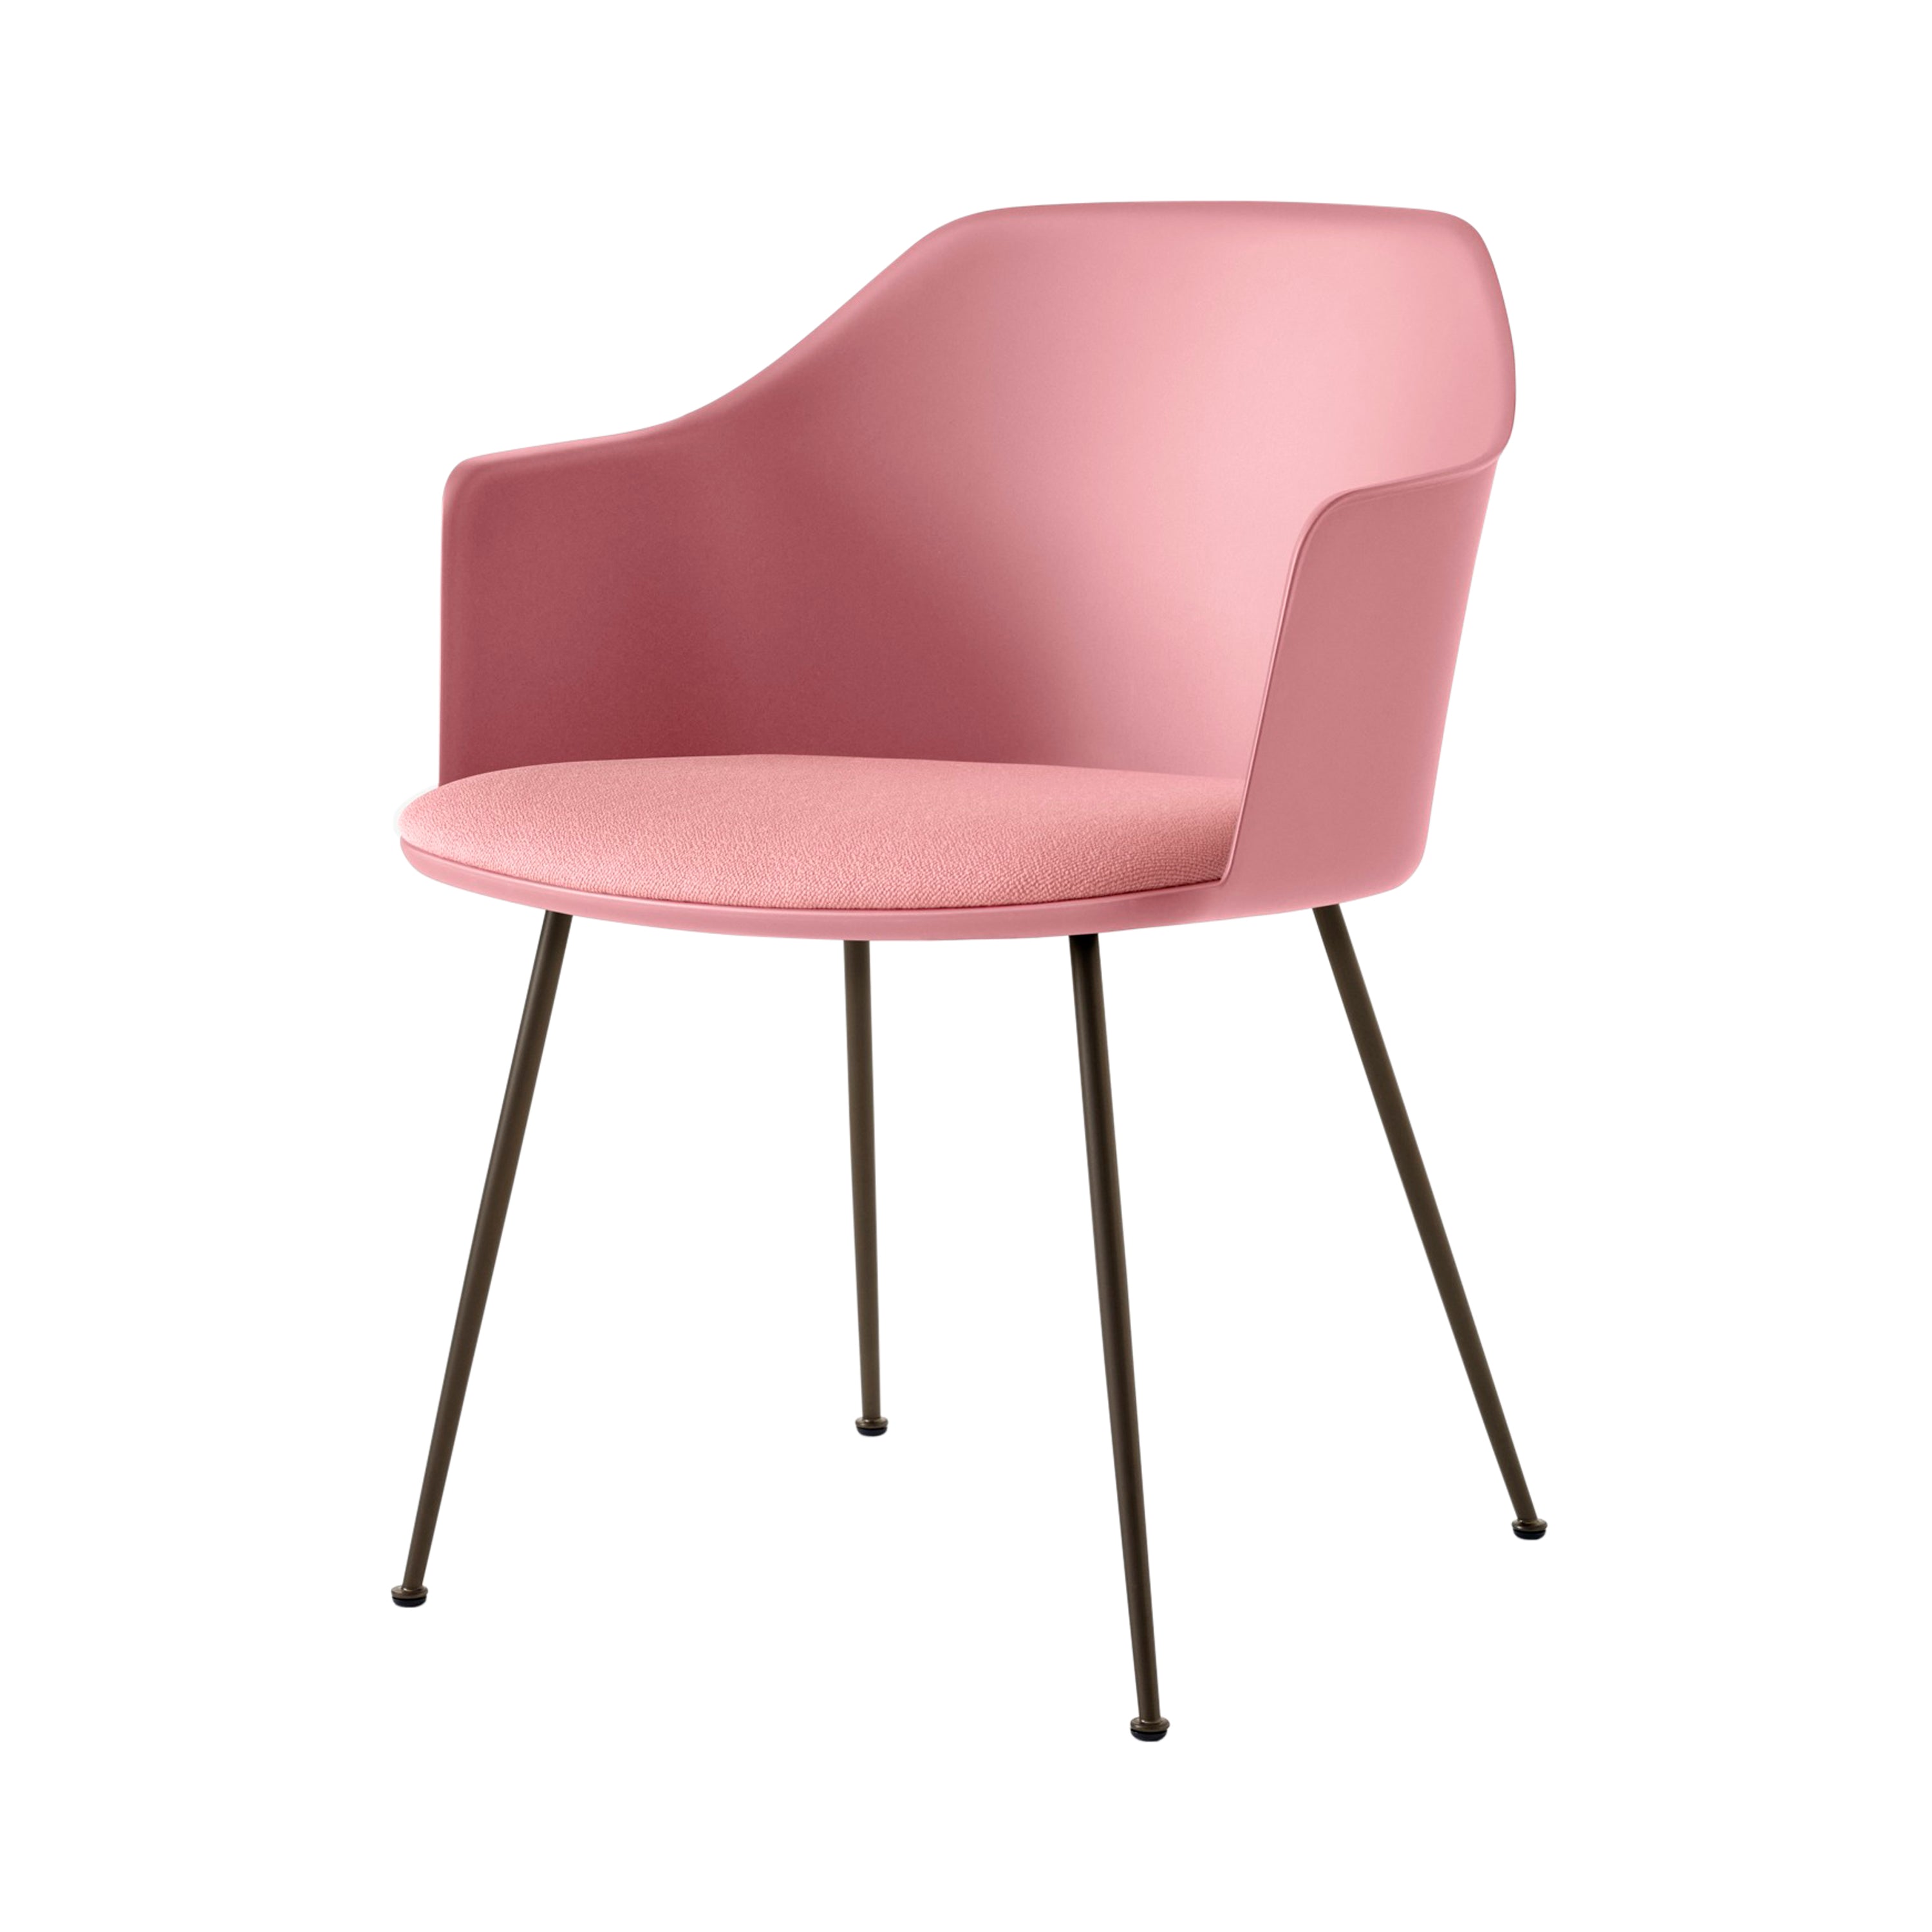 Rely Armchair HW34: Soft Pink + Bronzed